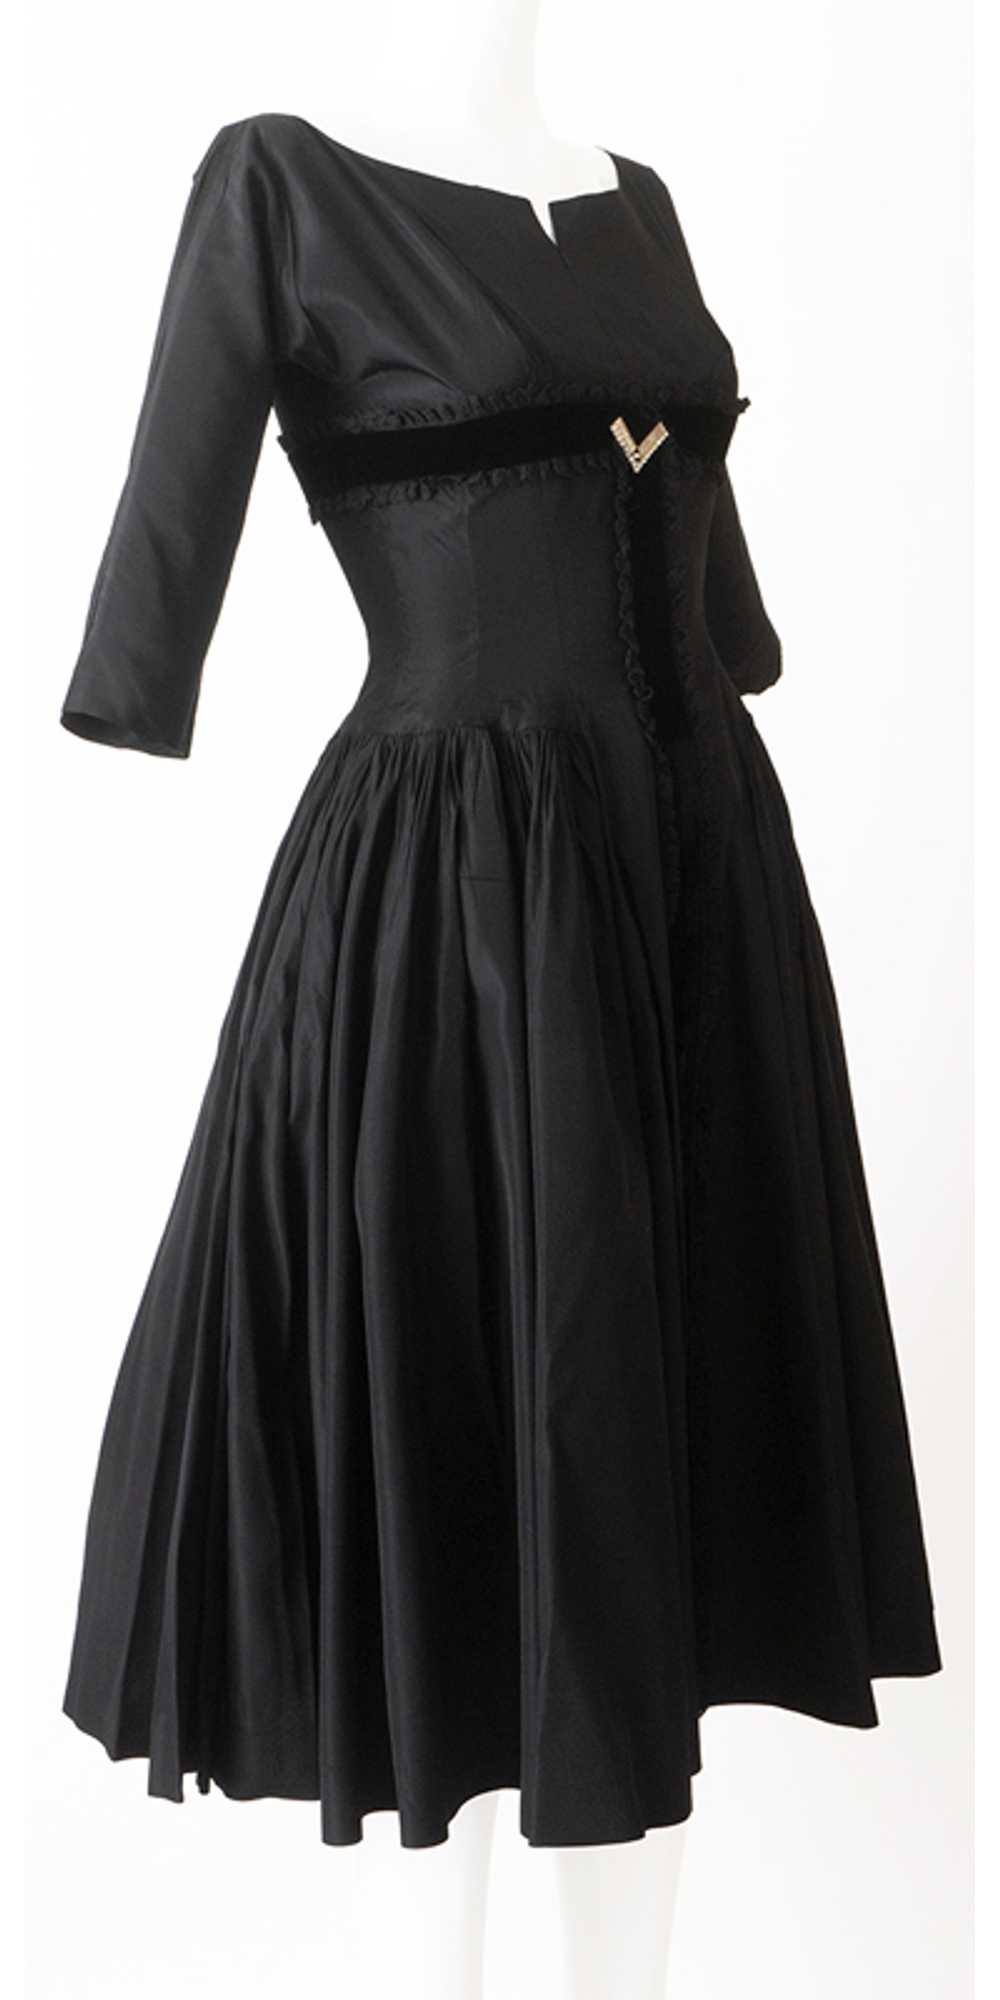 1950s Fit and Flare Party Dress - image 2